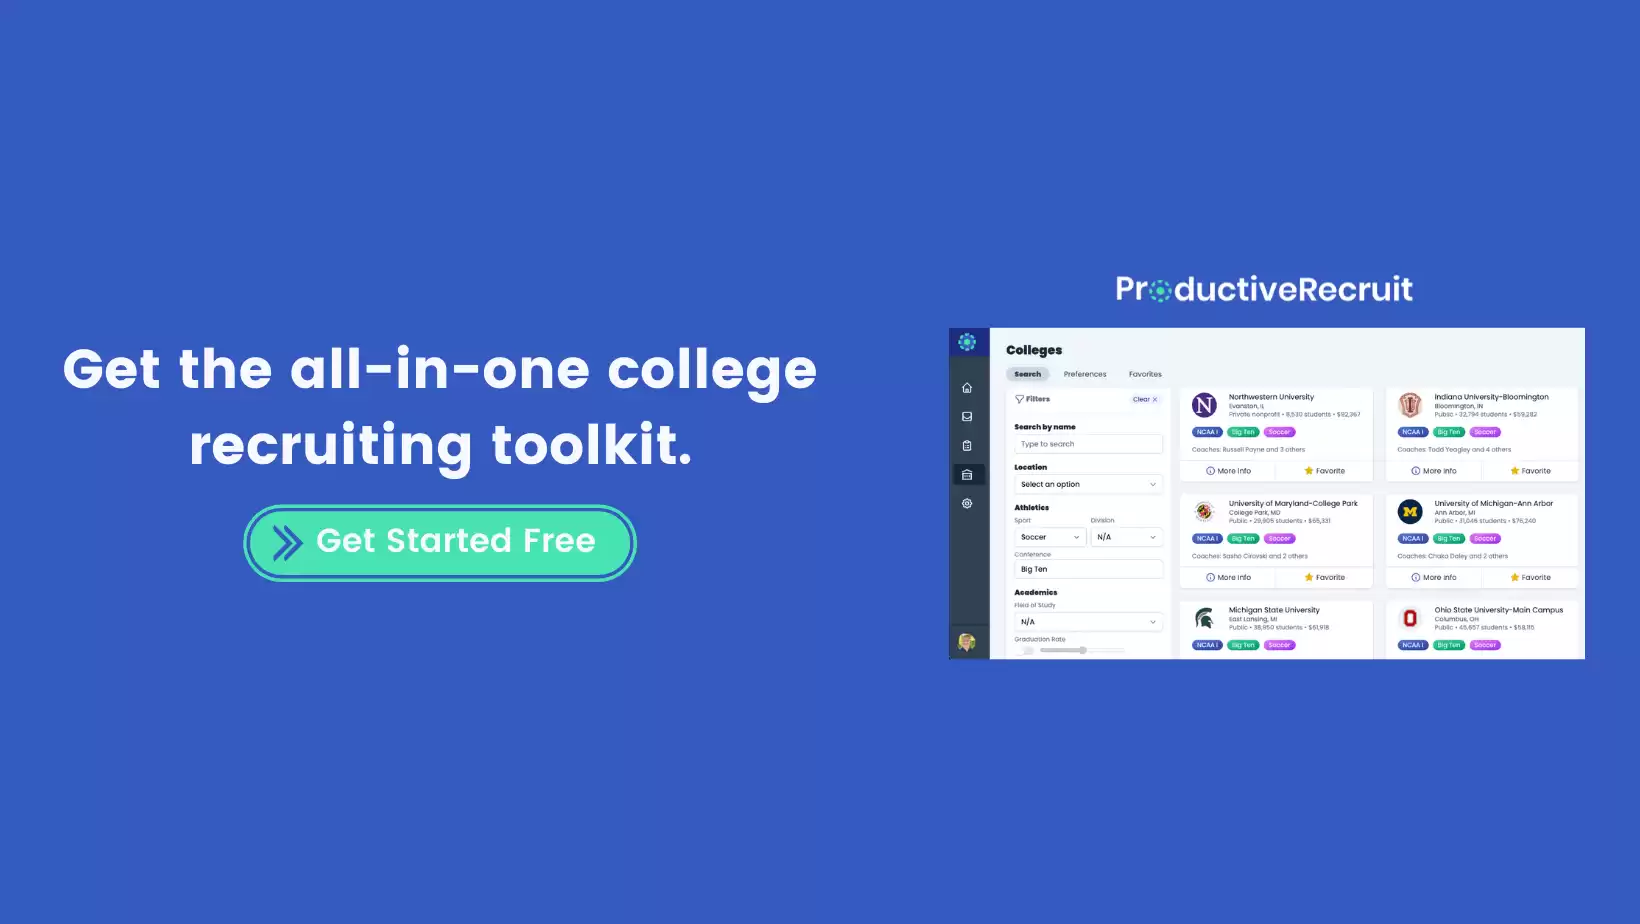 ProductiveRecruit: The All-in-One College Sports Recruiting Platform